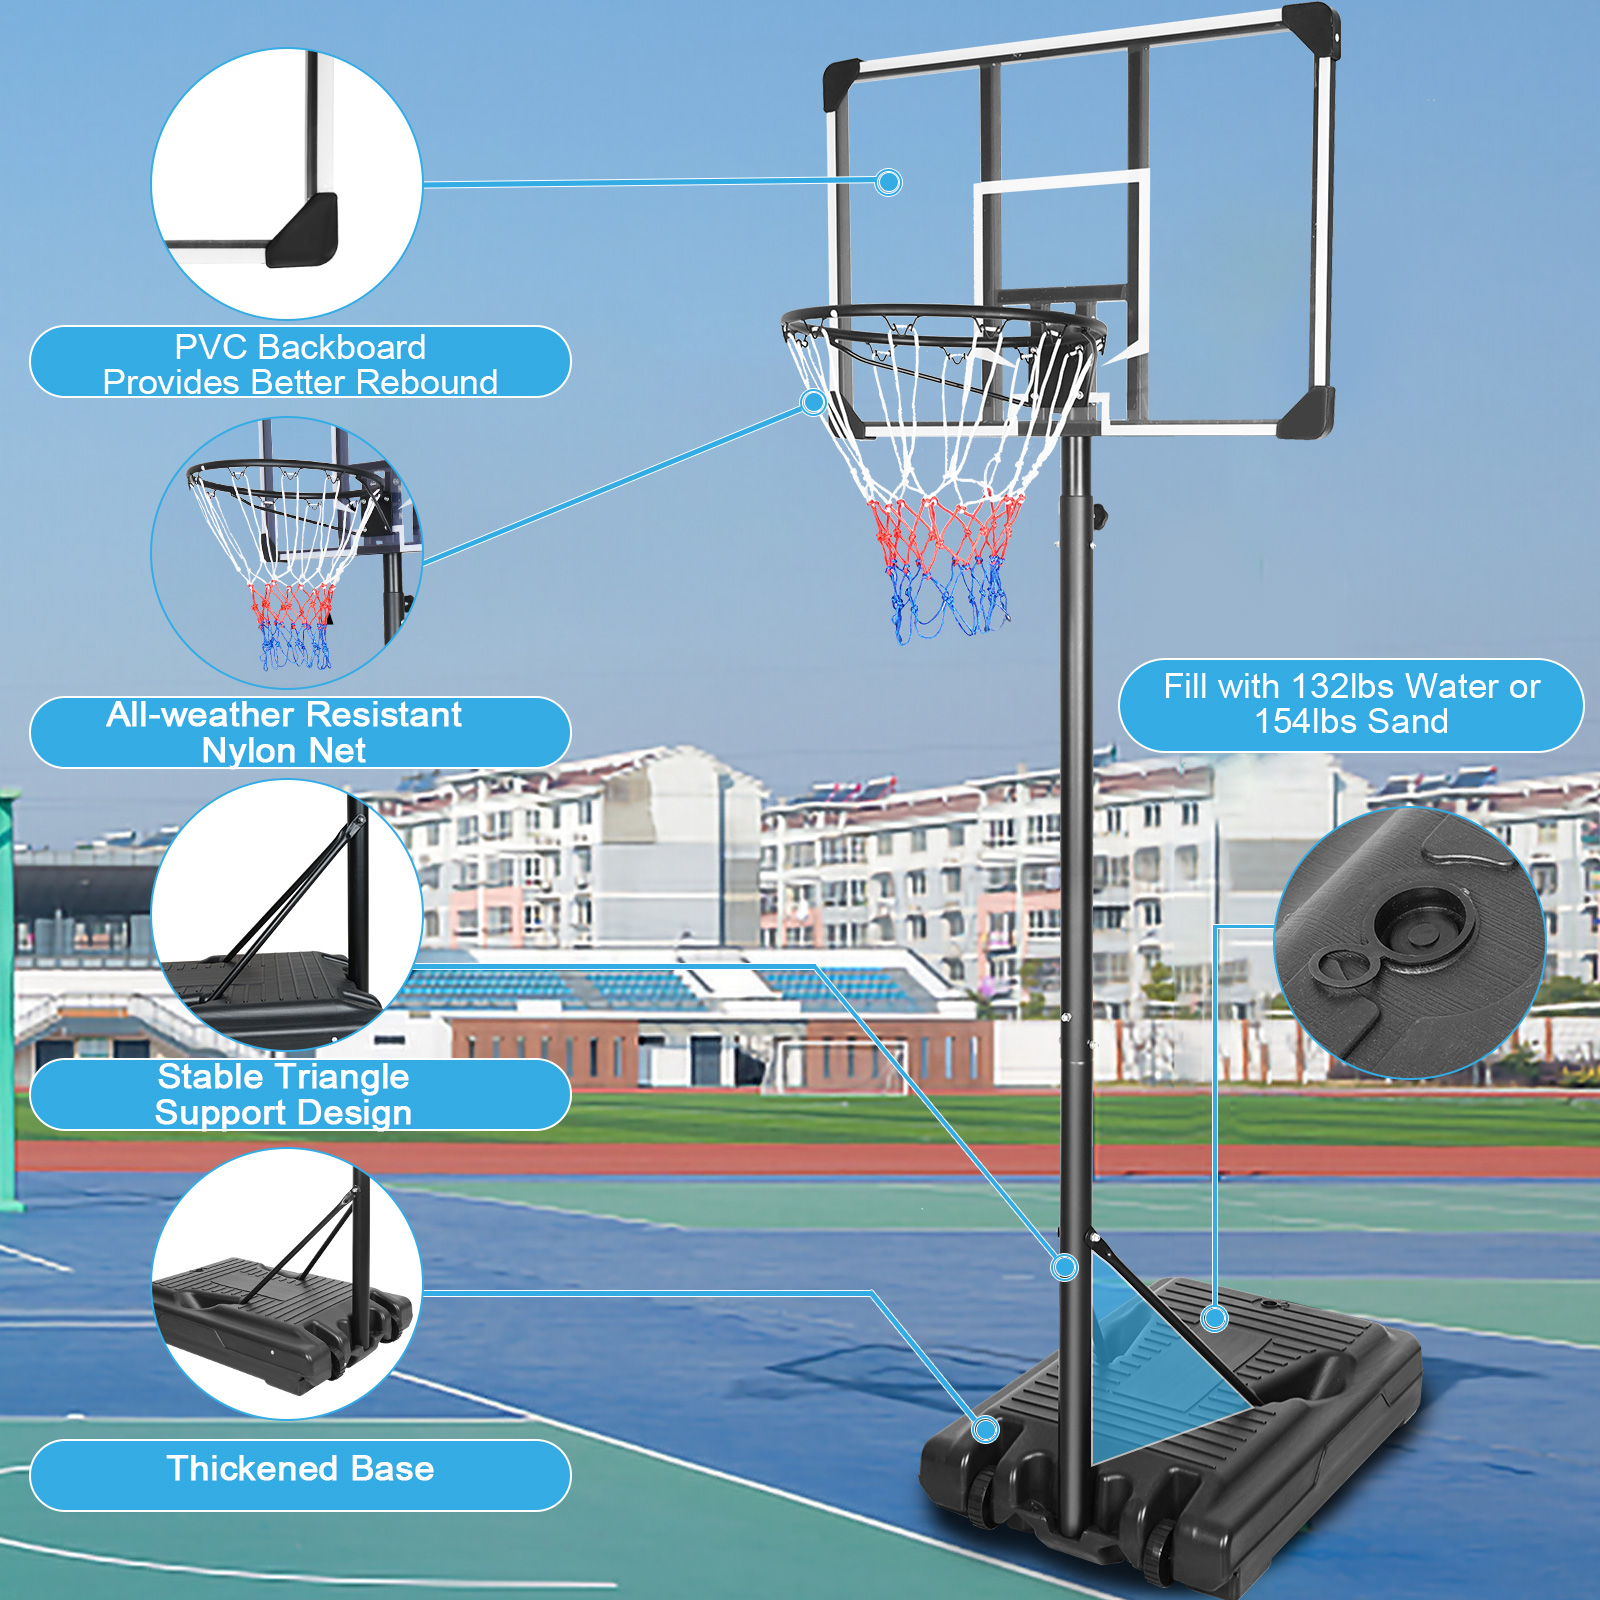 iRerts Portable Basketball Hoop for Teens Kids, Height Adjusted 6.2-8.5ft Indoor Basketball Goal System, Basketball Hoop Outdoor with Wheels and Backboard for Playground Backyard, Black - image 4 of 8